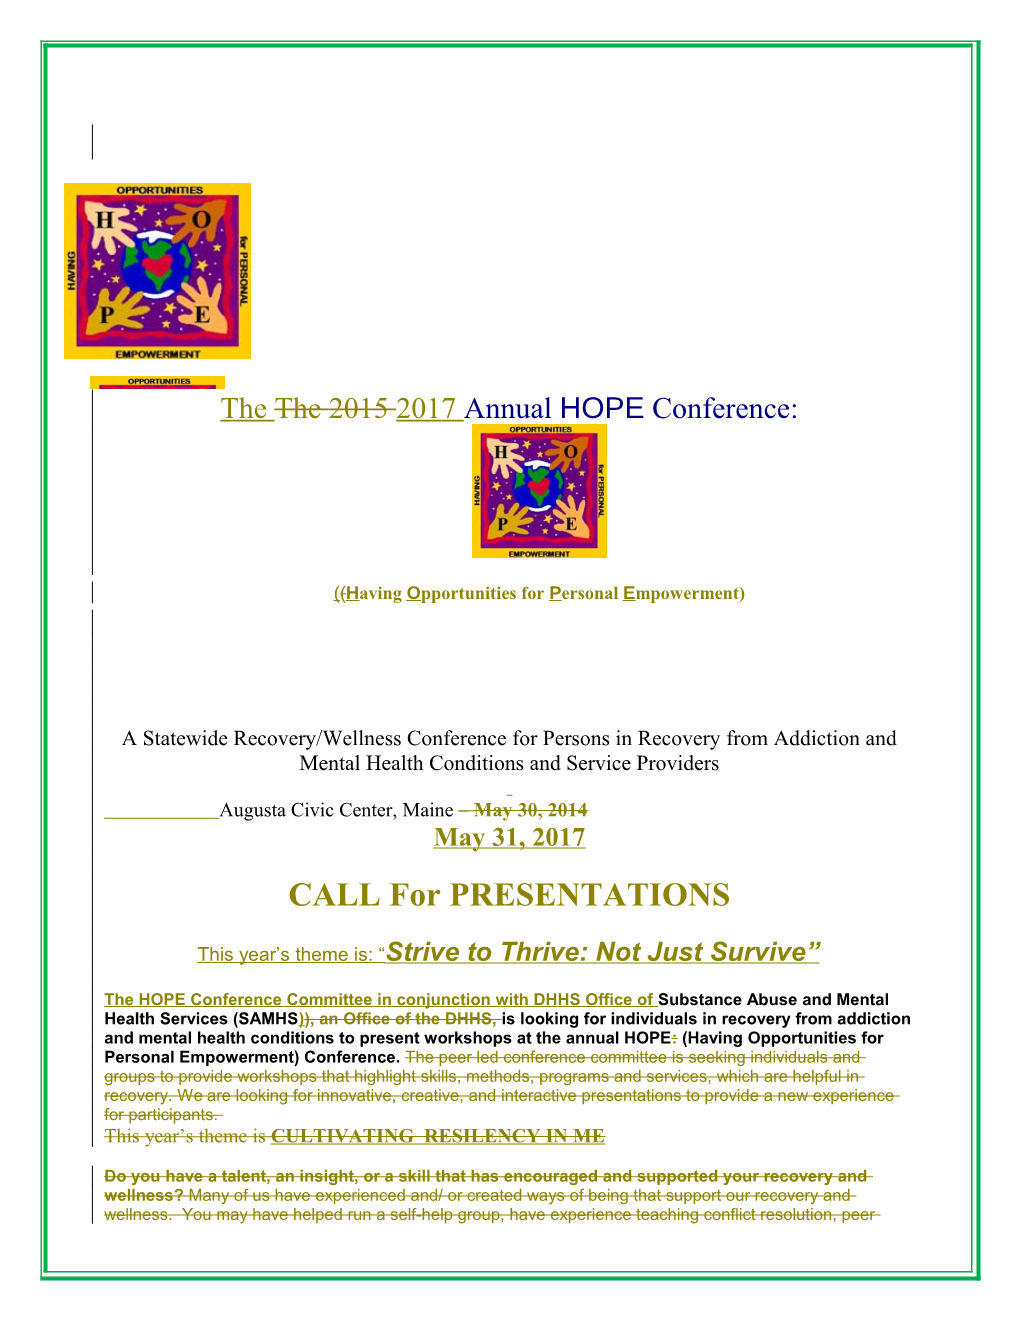 Call for Presentations W-Comm. Chngs.Pub